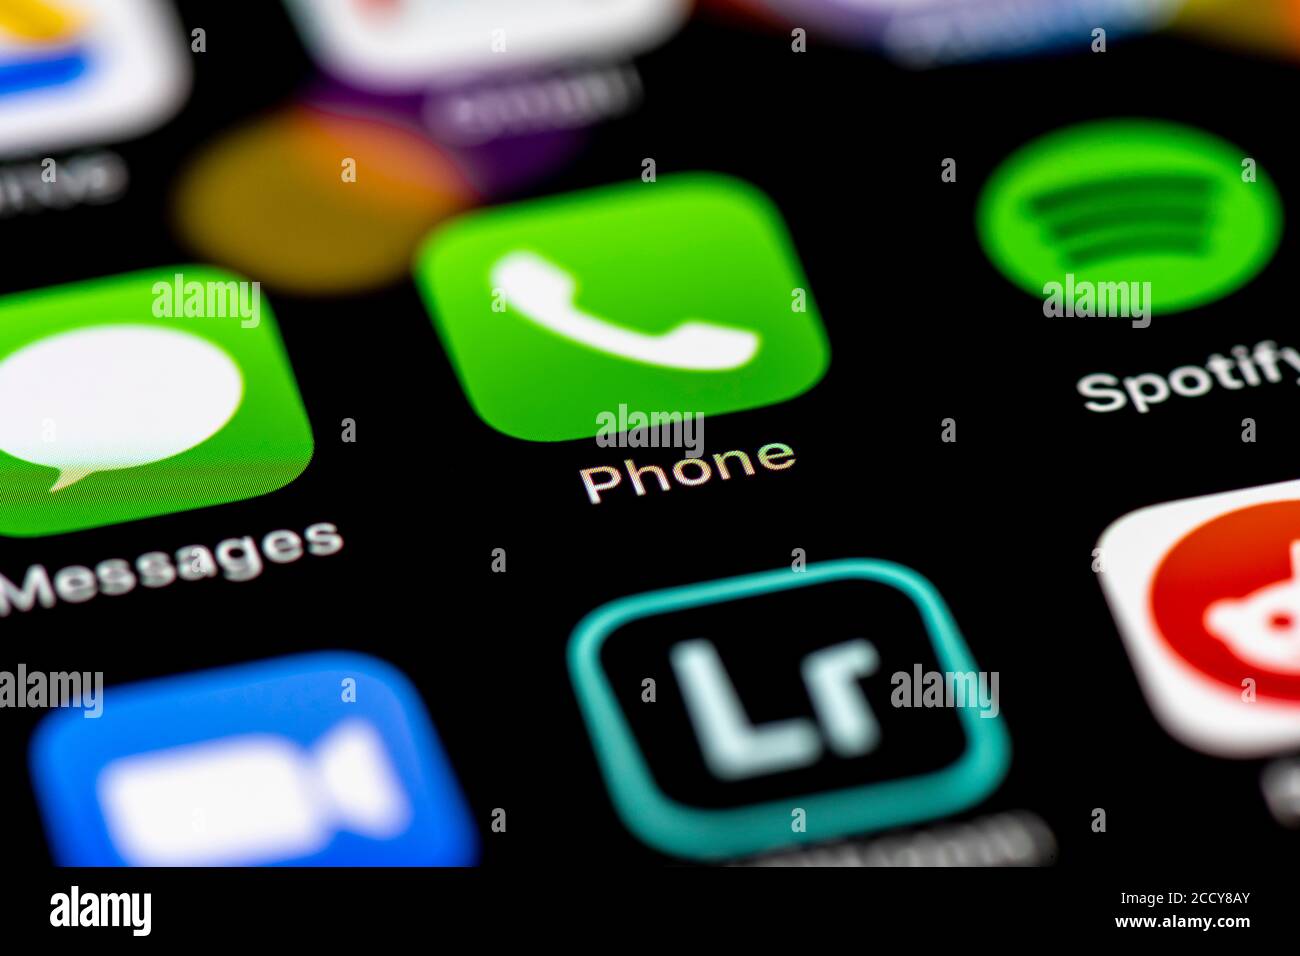 Phone, App Icons on a mobile phone Display, iPhone, Smartphone, close-up, format filling Stock Photo